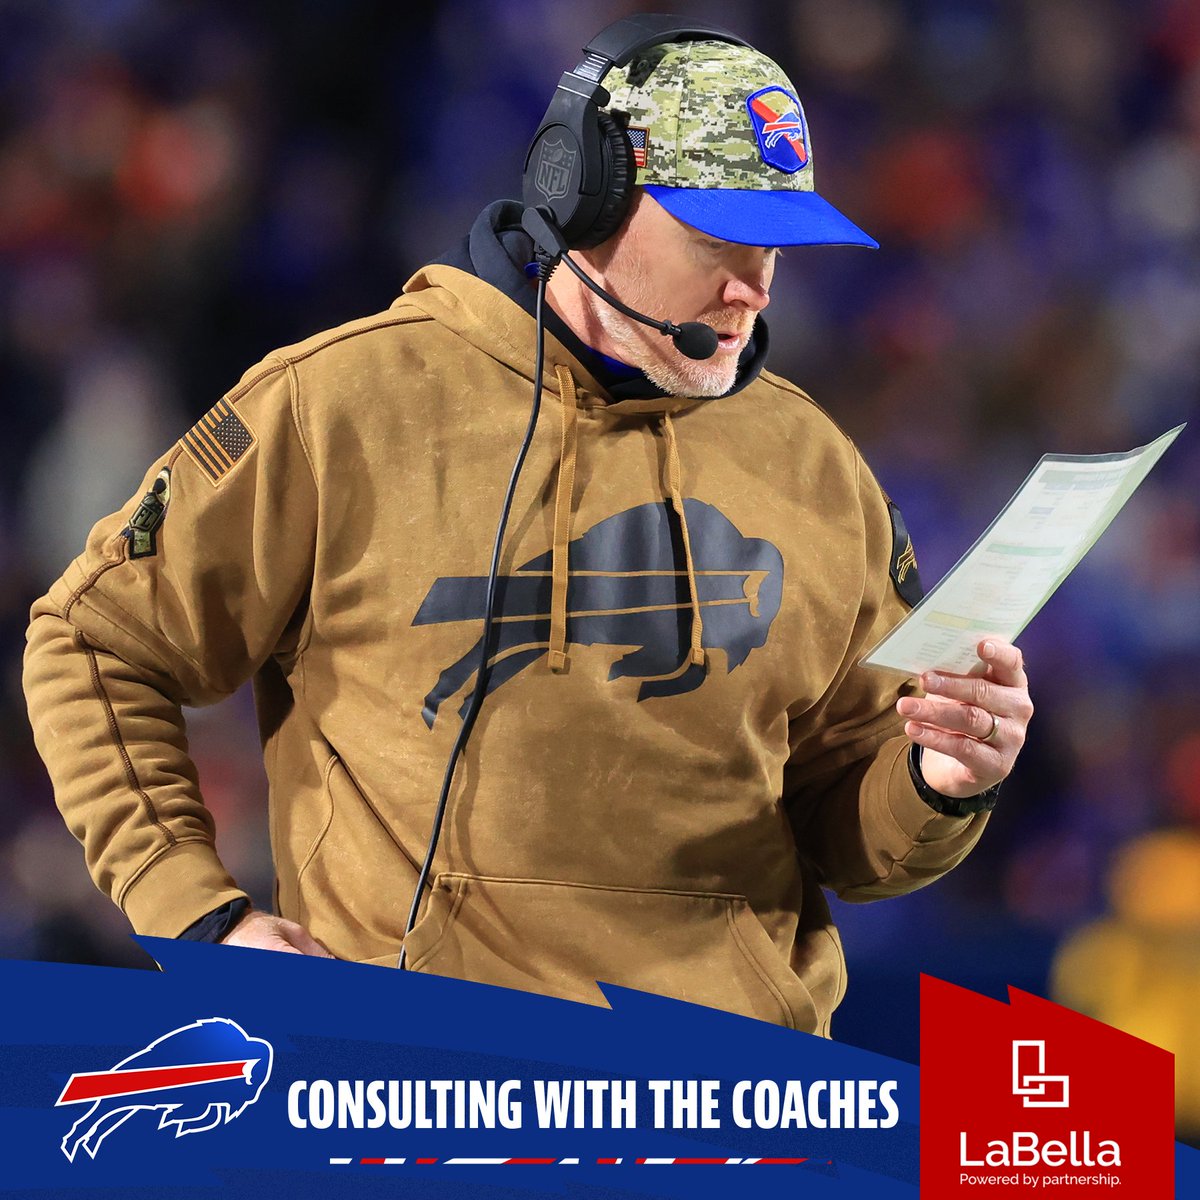 'The goal is to find that confidence again.' Why Coach McDermott made a change with the offensive coaching staff: bufbills.co/3sIguEe